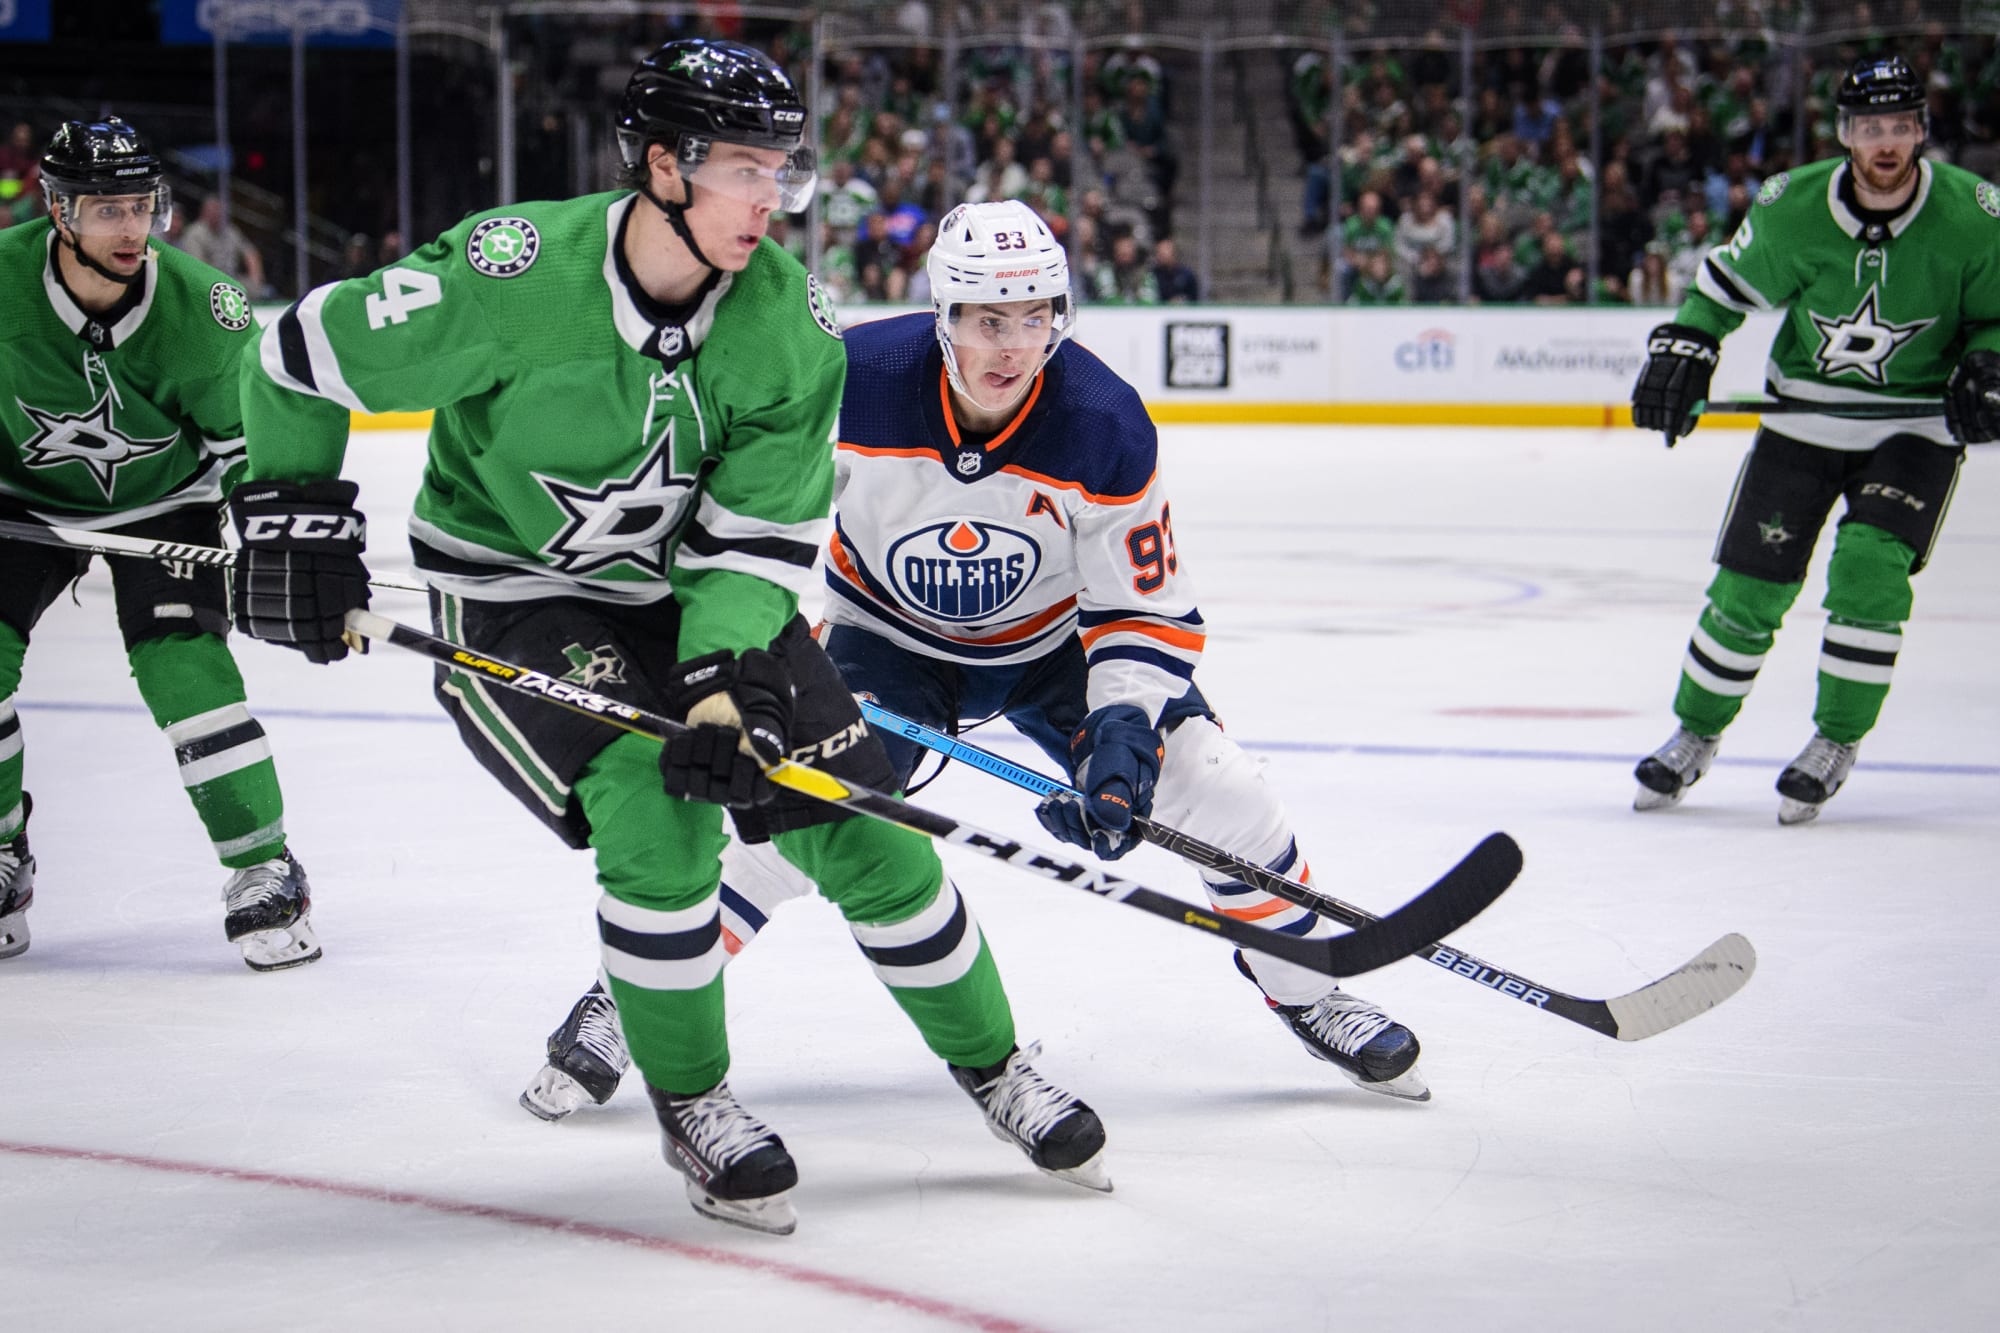 Oilers vs Stars: Date, Time, Betting Odds, Streaming, Lineup, More